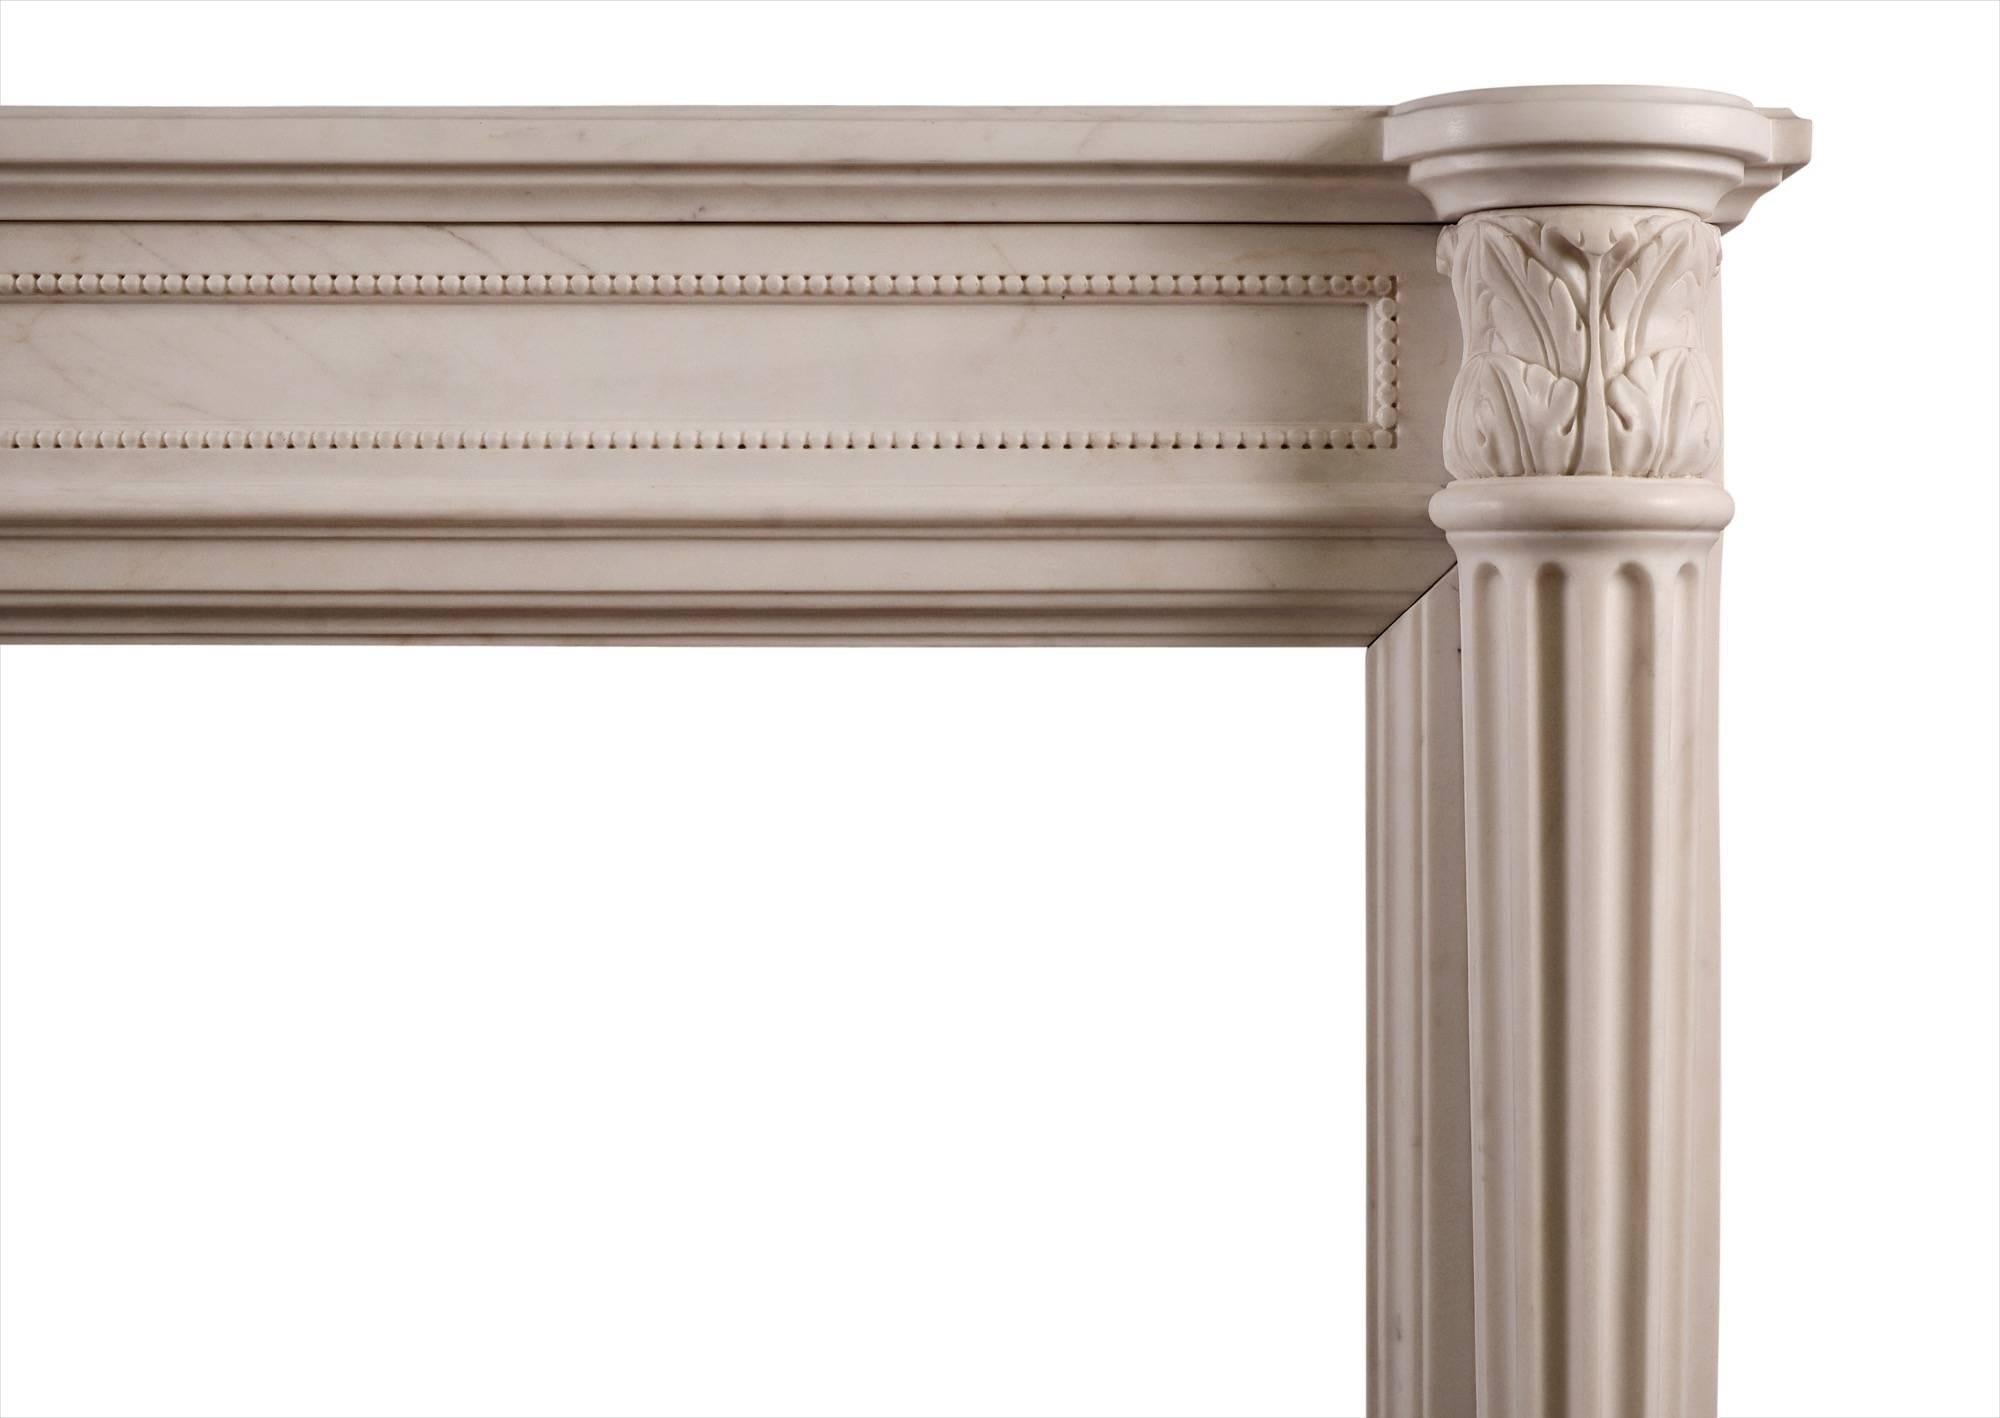 An elegant French Louis XVI style white marble fireplace, with panelled and beaded frieze, tapering half round fluted columns with carved acanthus leaf capitals. A copy of an earlier piece.

Measures: Shelf width 1264 mm 49 ¾ in
Overall height 1067